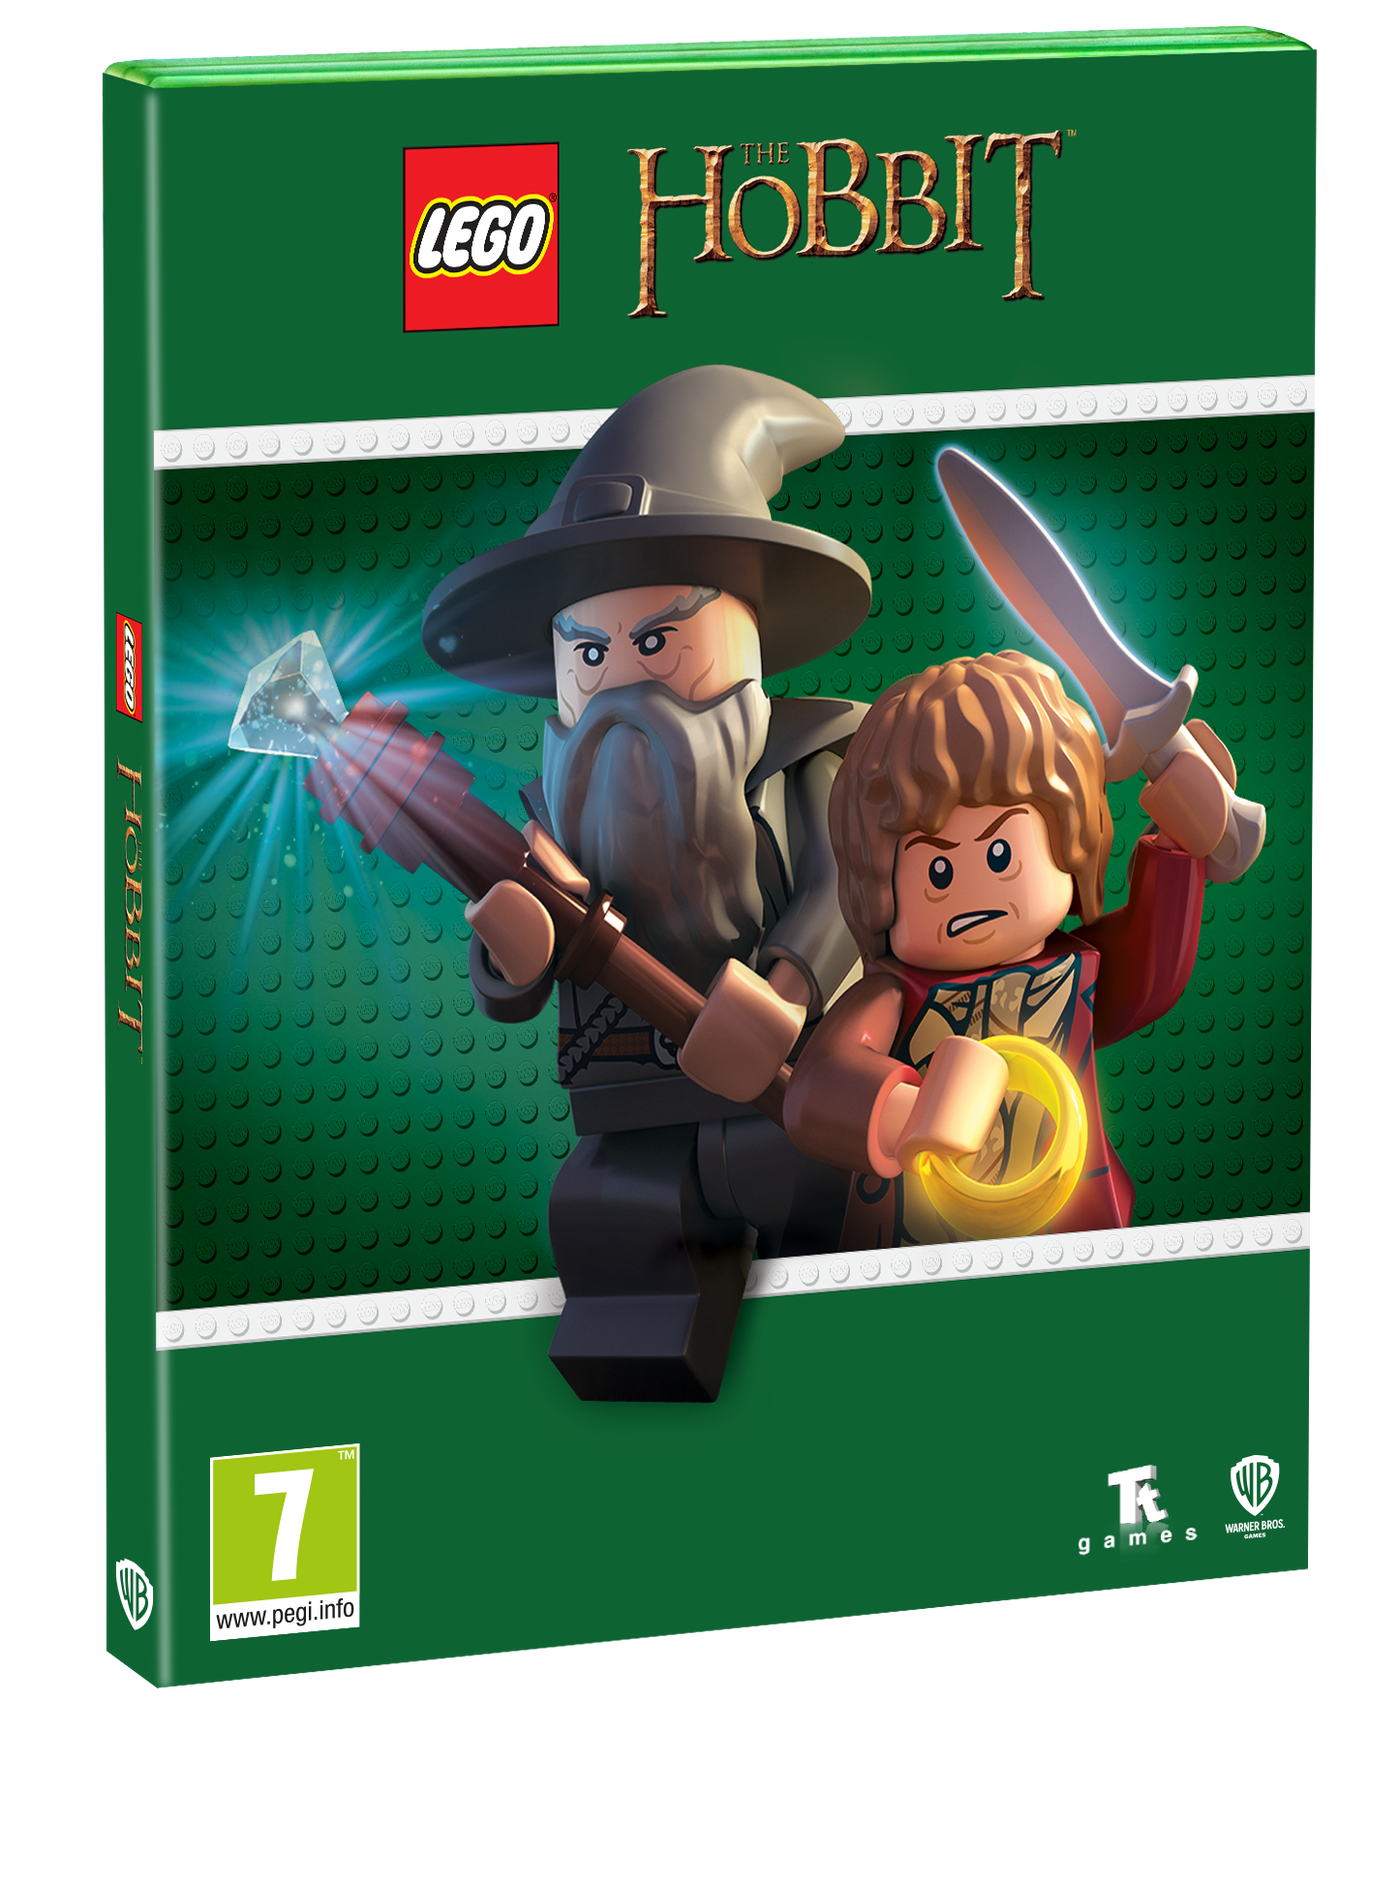 LEGO The Hobbit Video Game (Xbox One)